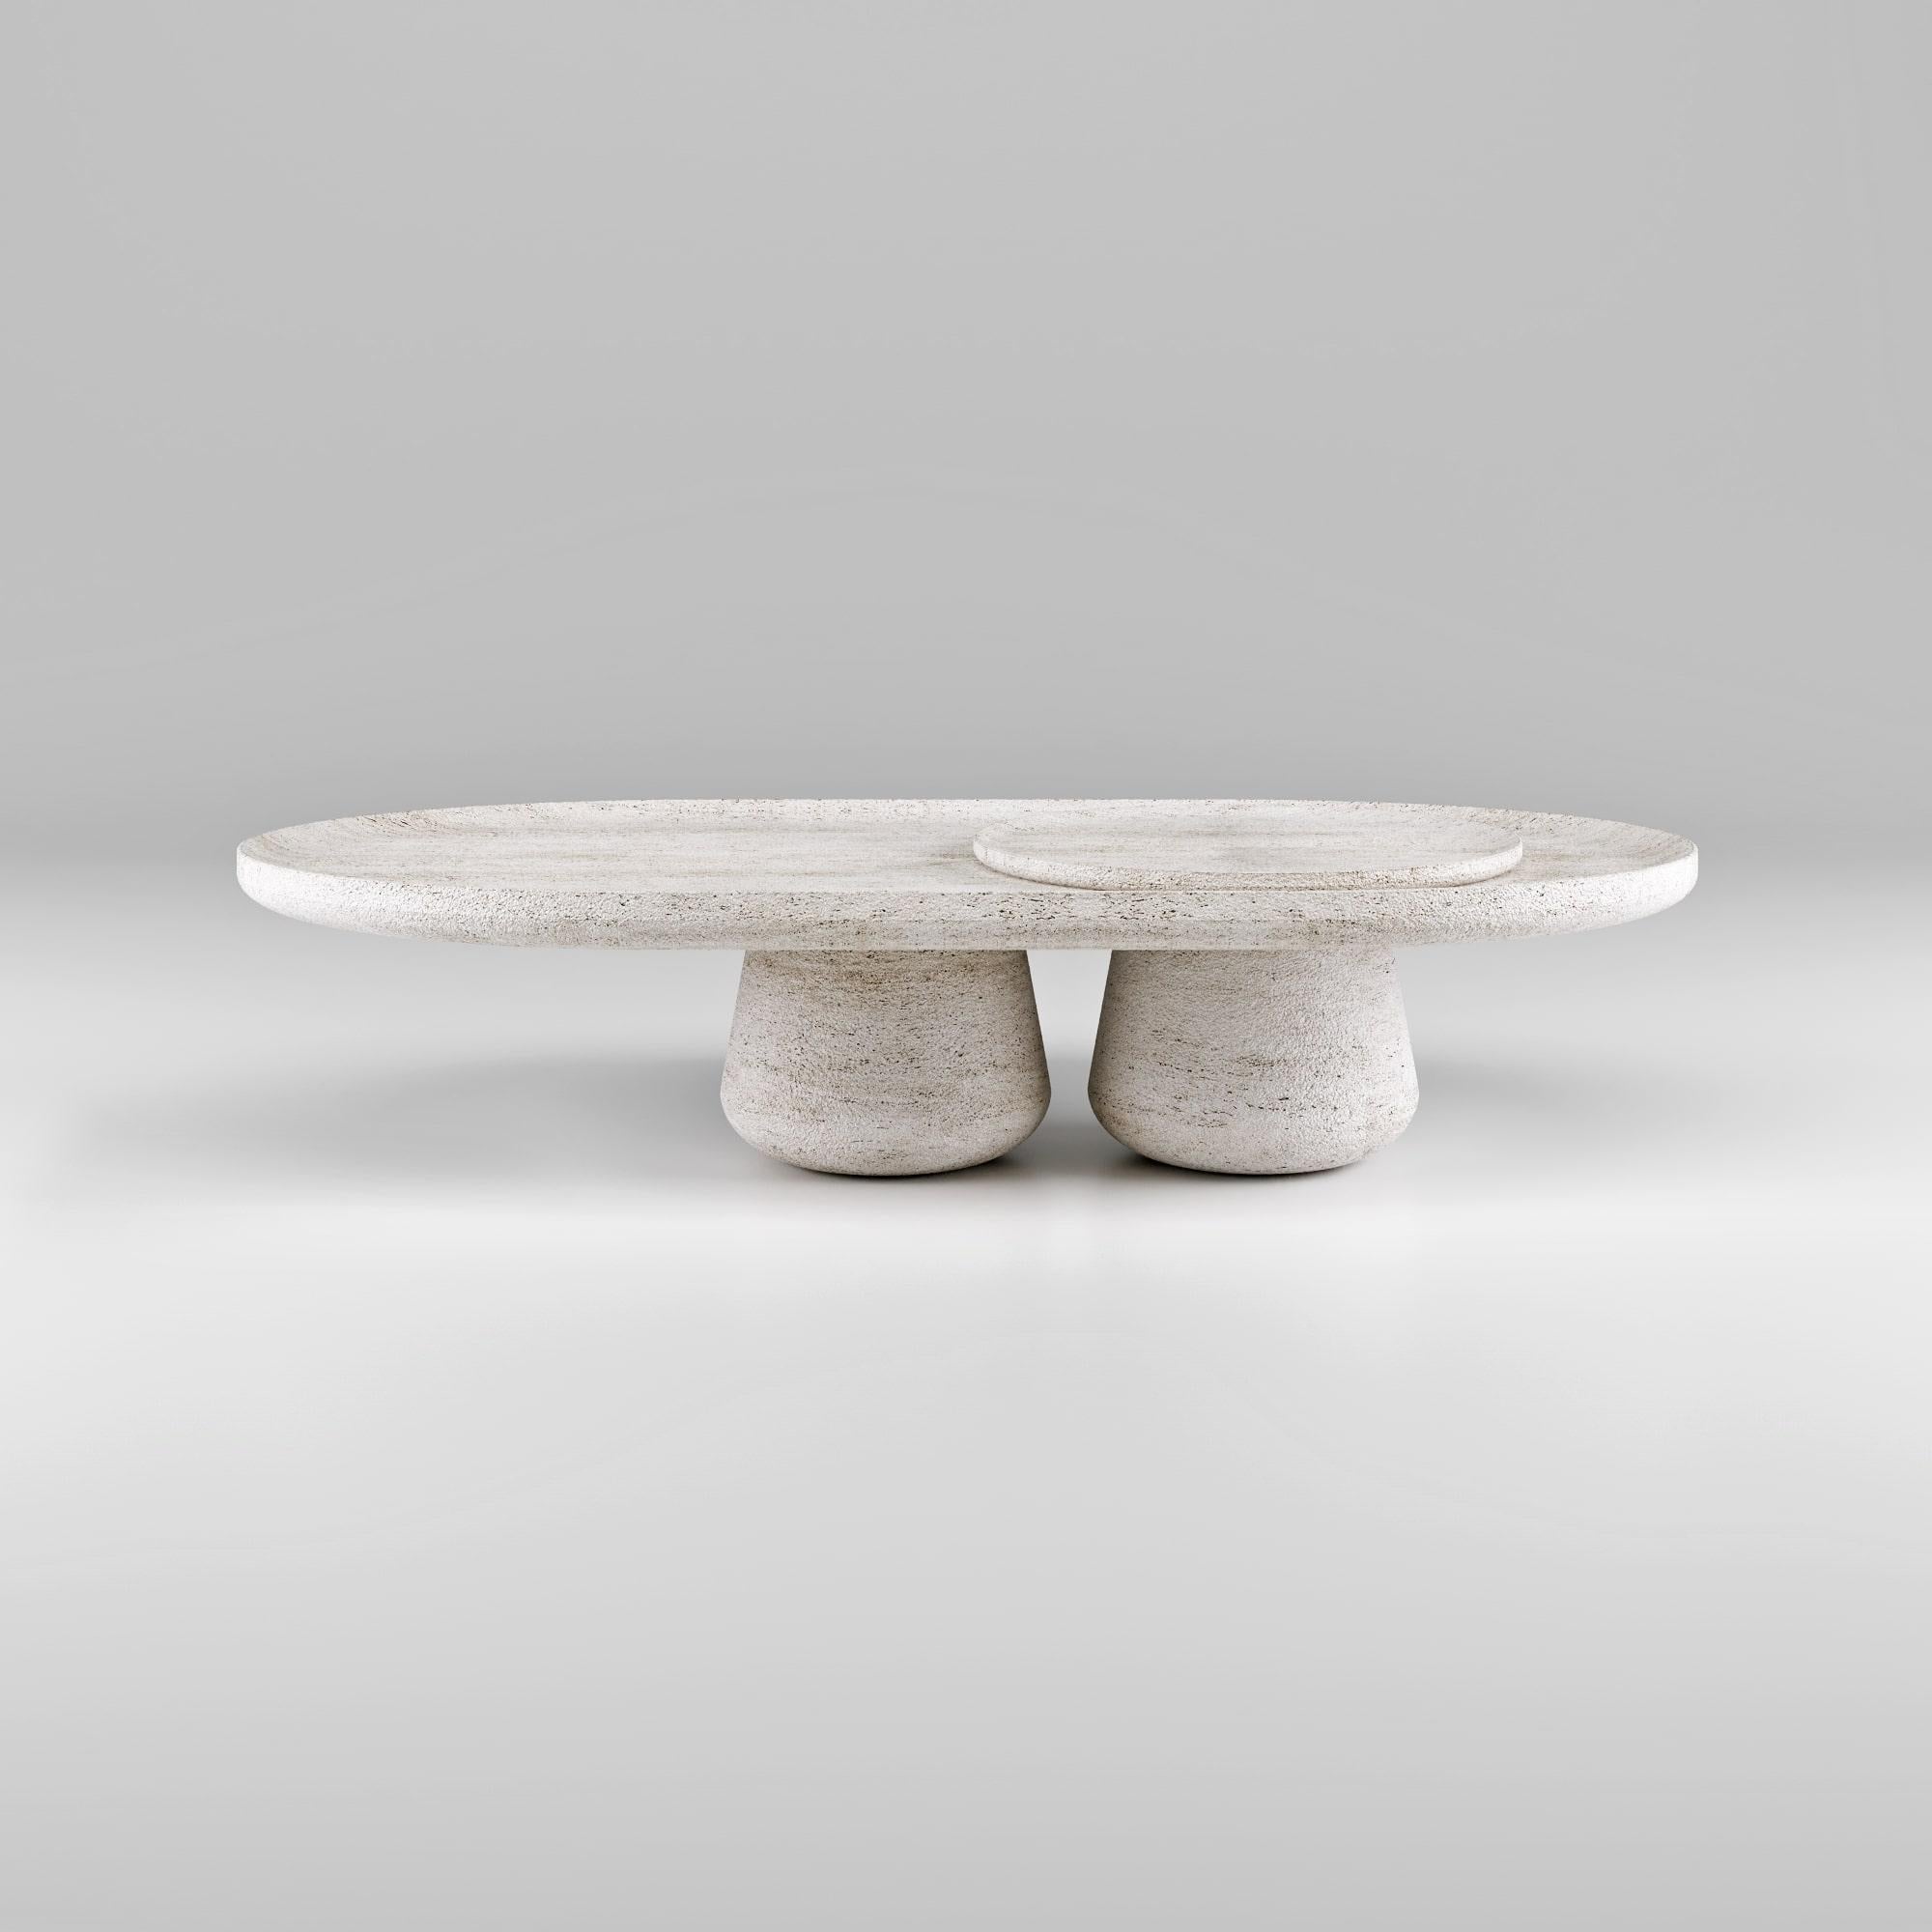 The Bold coffee table beautifully embodies the essence of Italian craftsmanship through sophisticated aesthetics and attention to detail that results in a sublime sensory experience. Available in wood or stone, each model has its own personality and